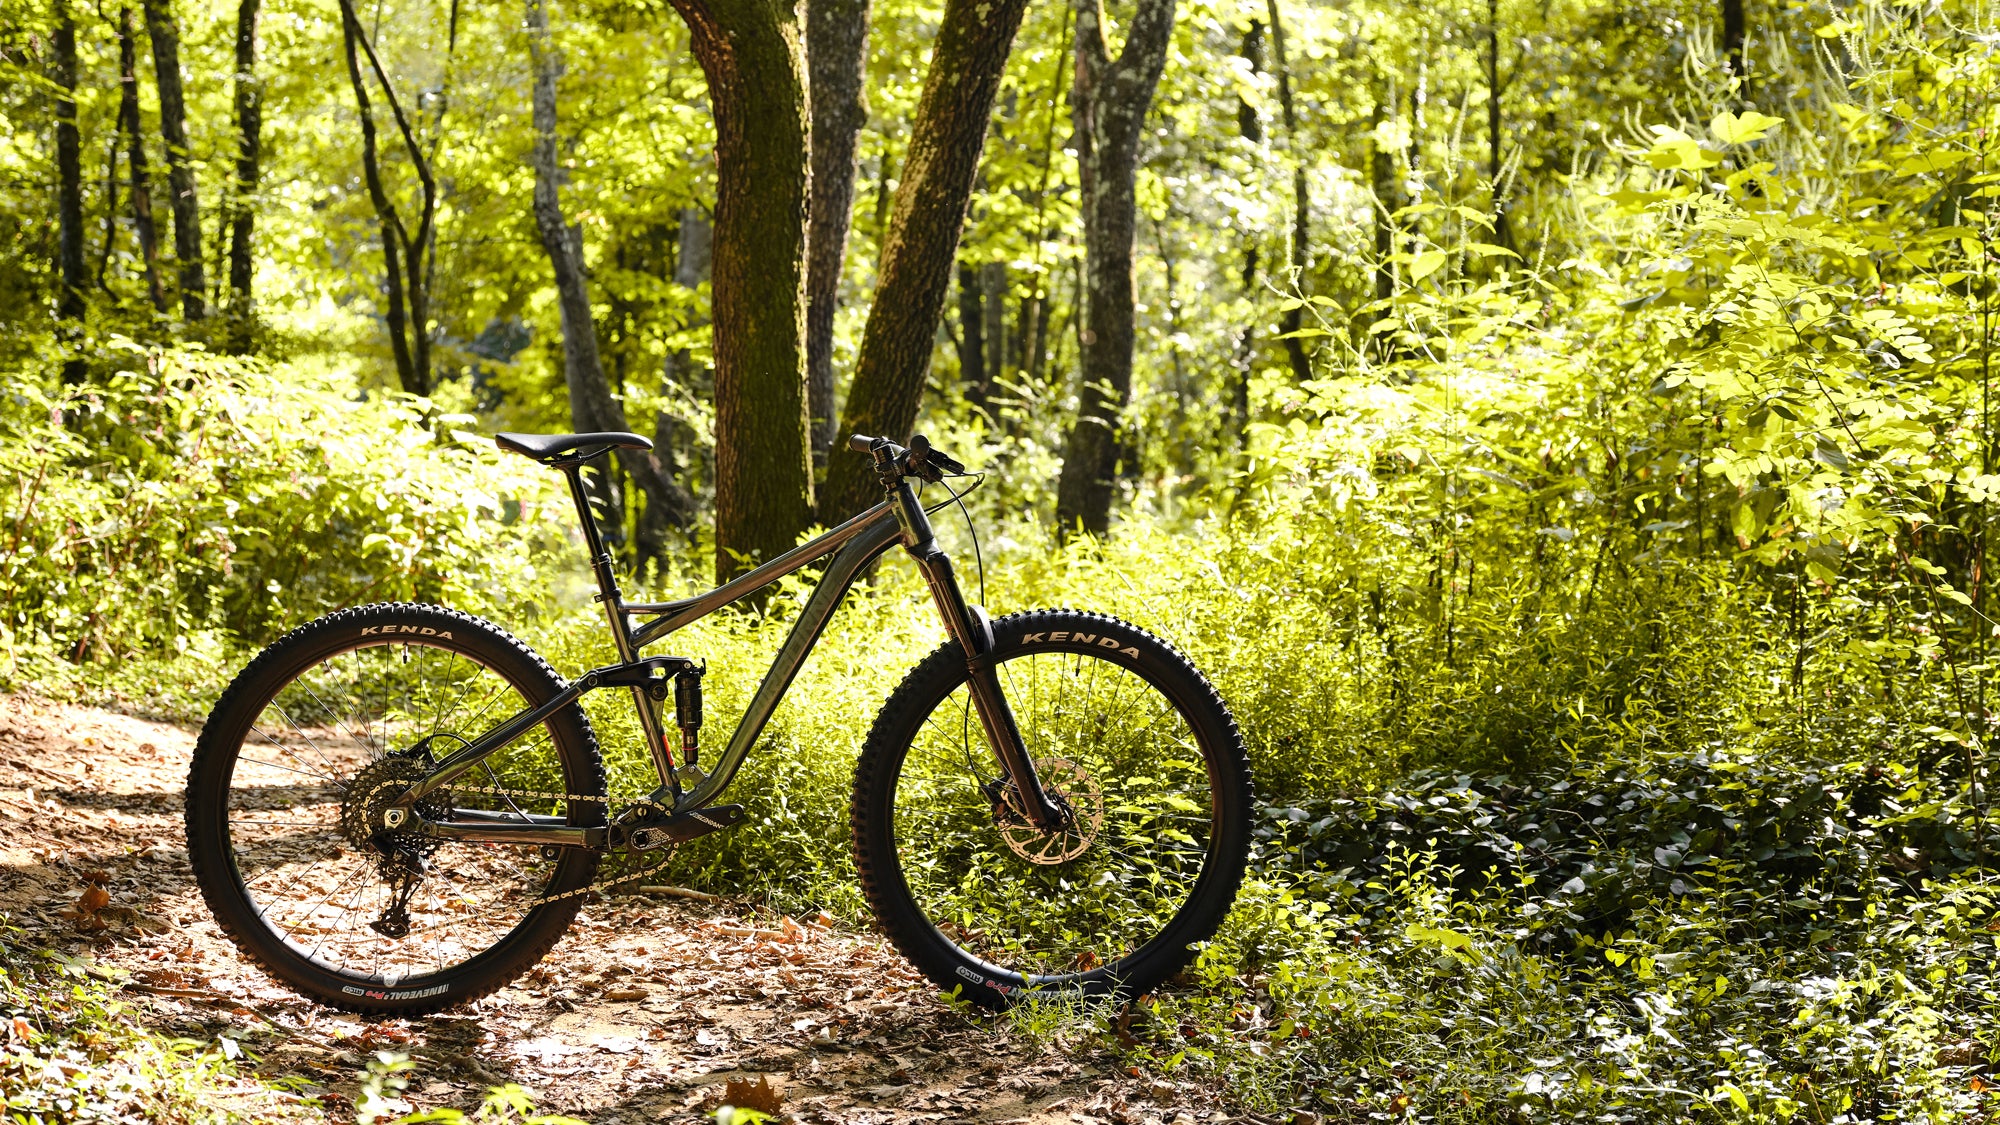 Introducing The Toxin 29 Full Suspension Trail Bike